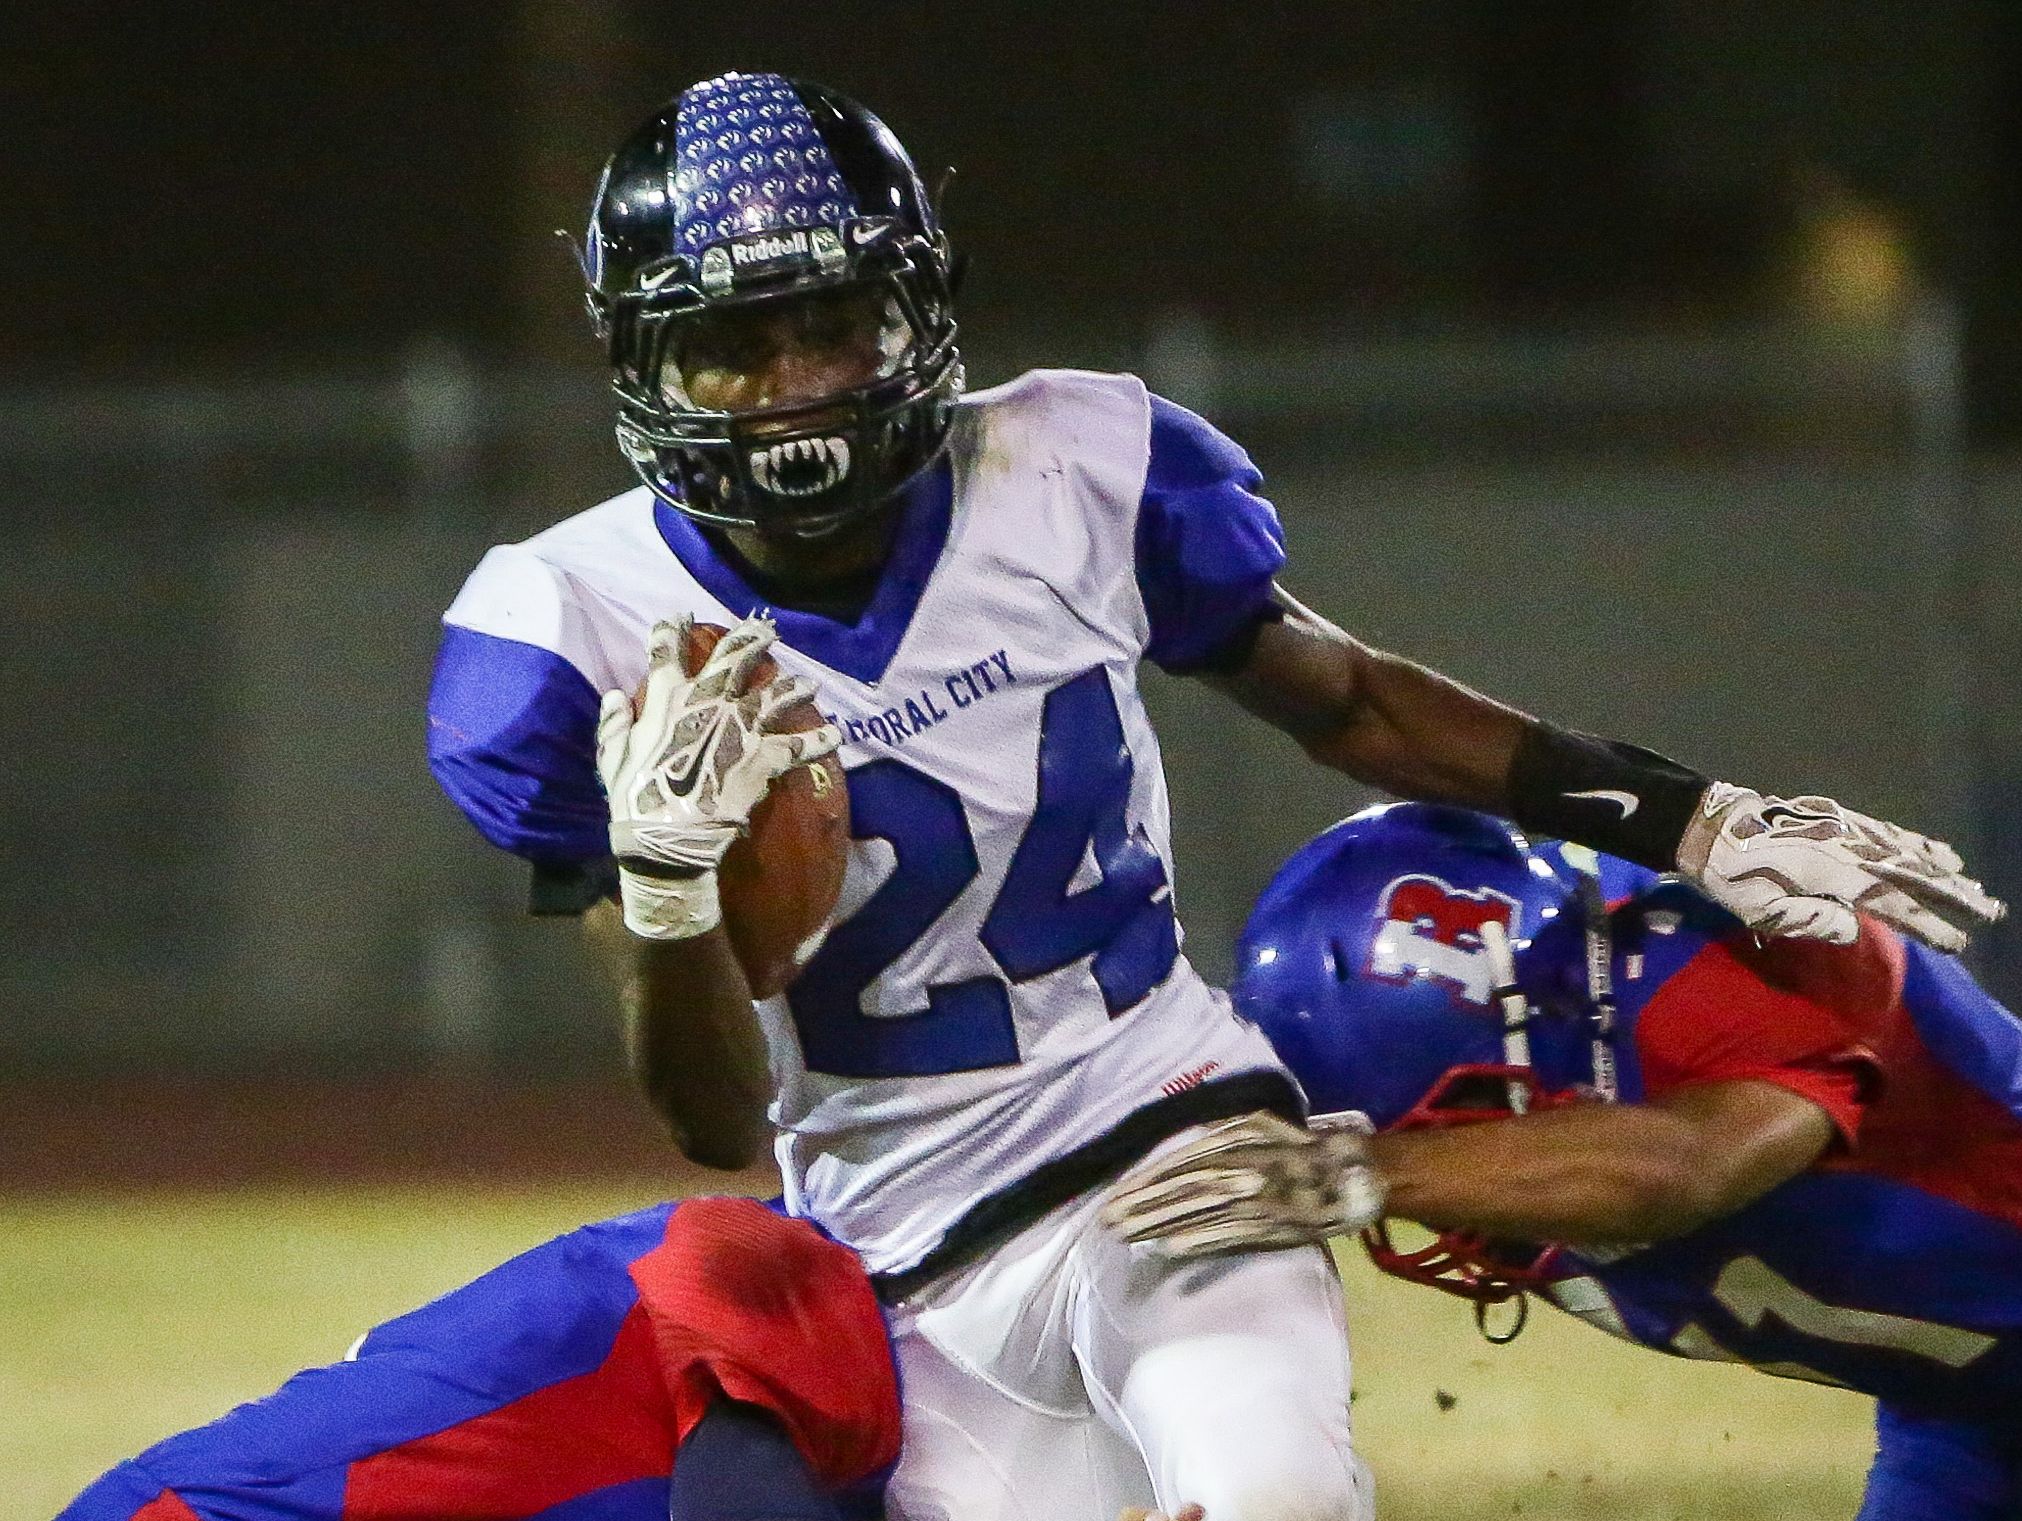 Cathedral City's James Green sneaks between two Indio defenders on Friday during the Lions' 34-7 victory.